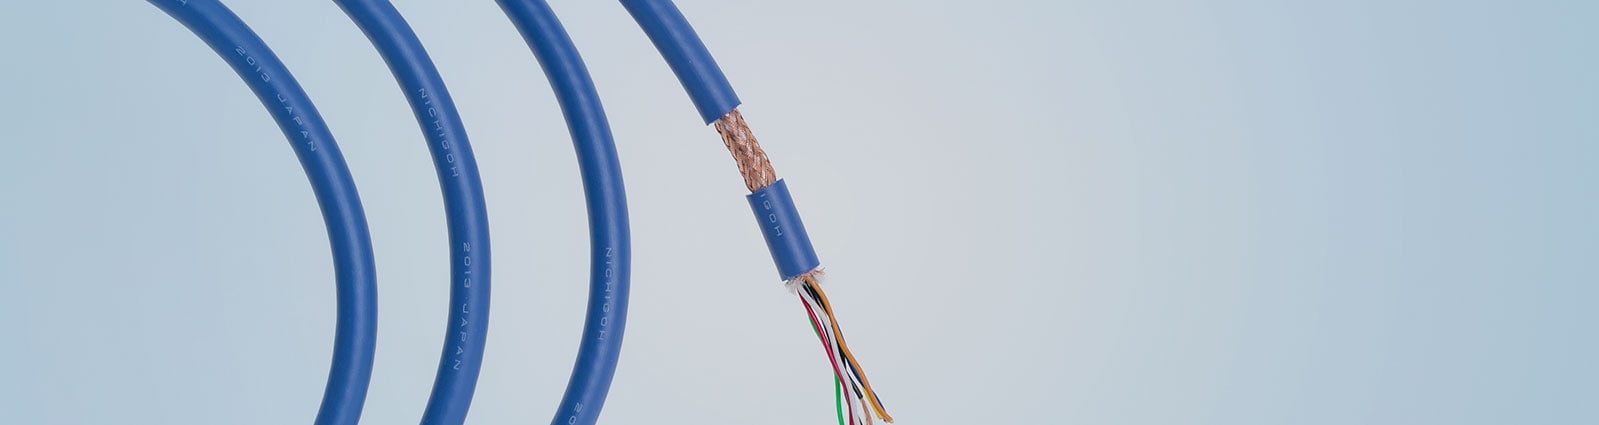 W.W.S.CWORLD WIDE STANDARD CABLE-Series